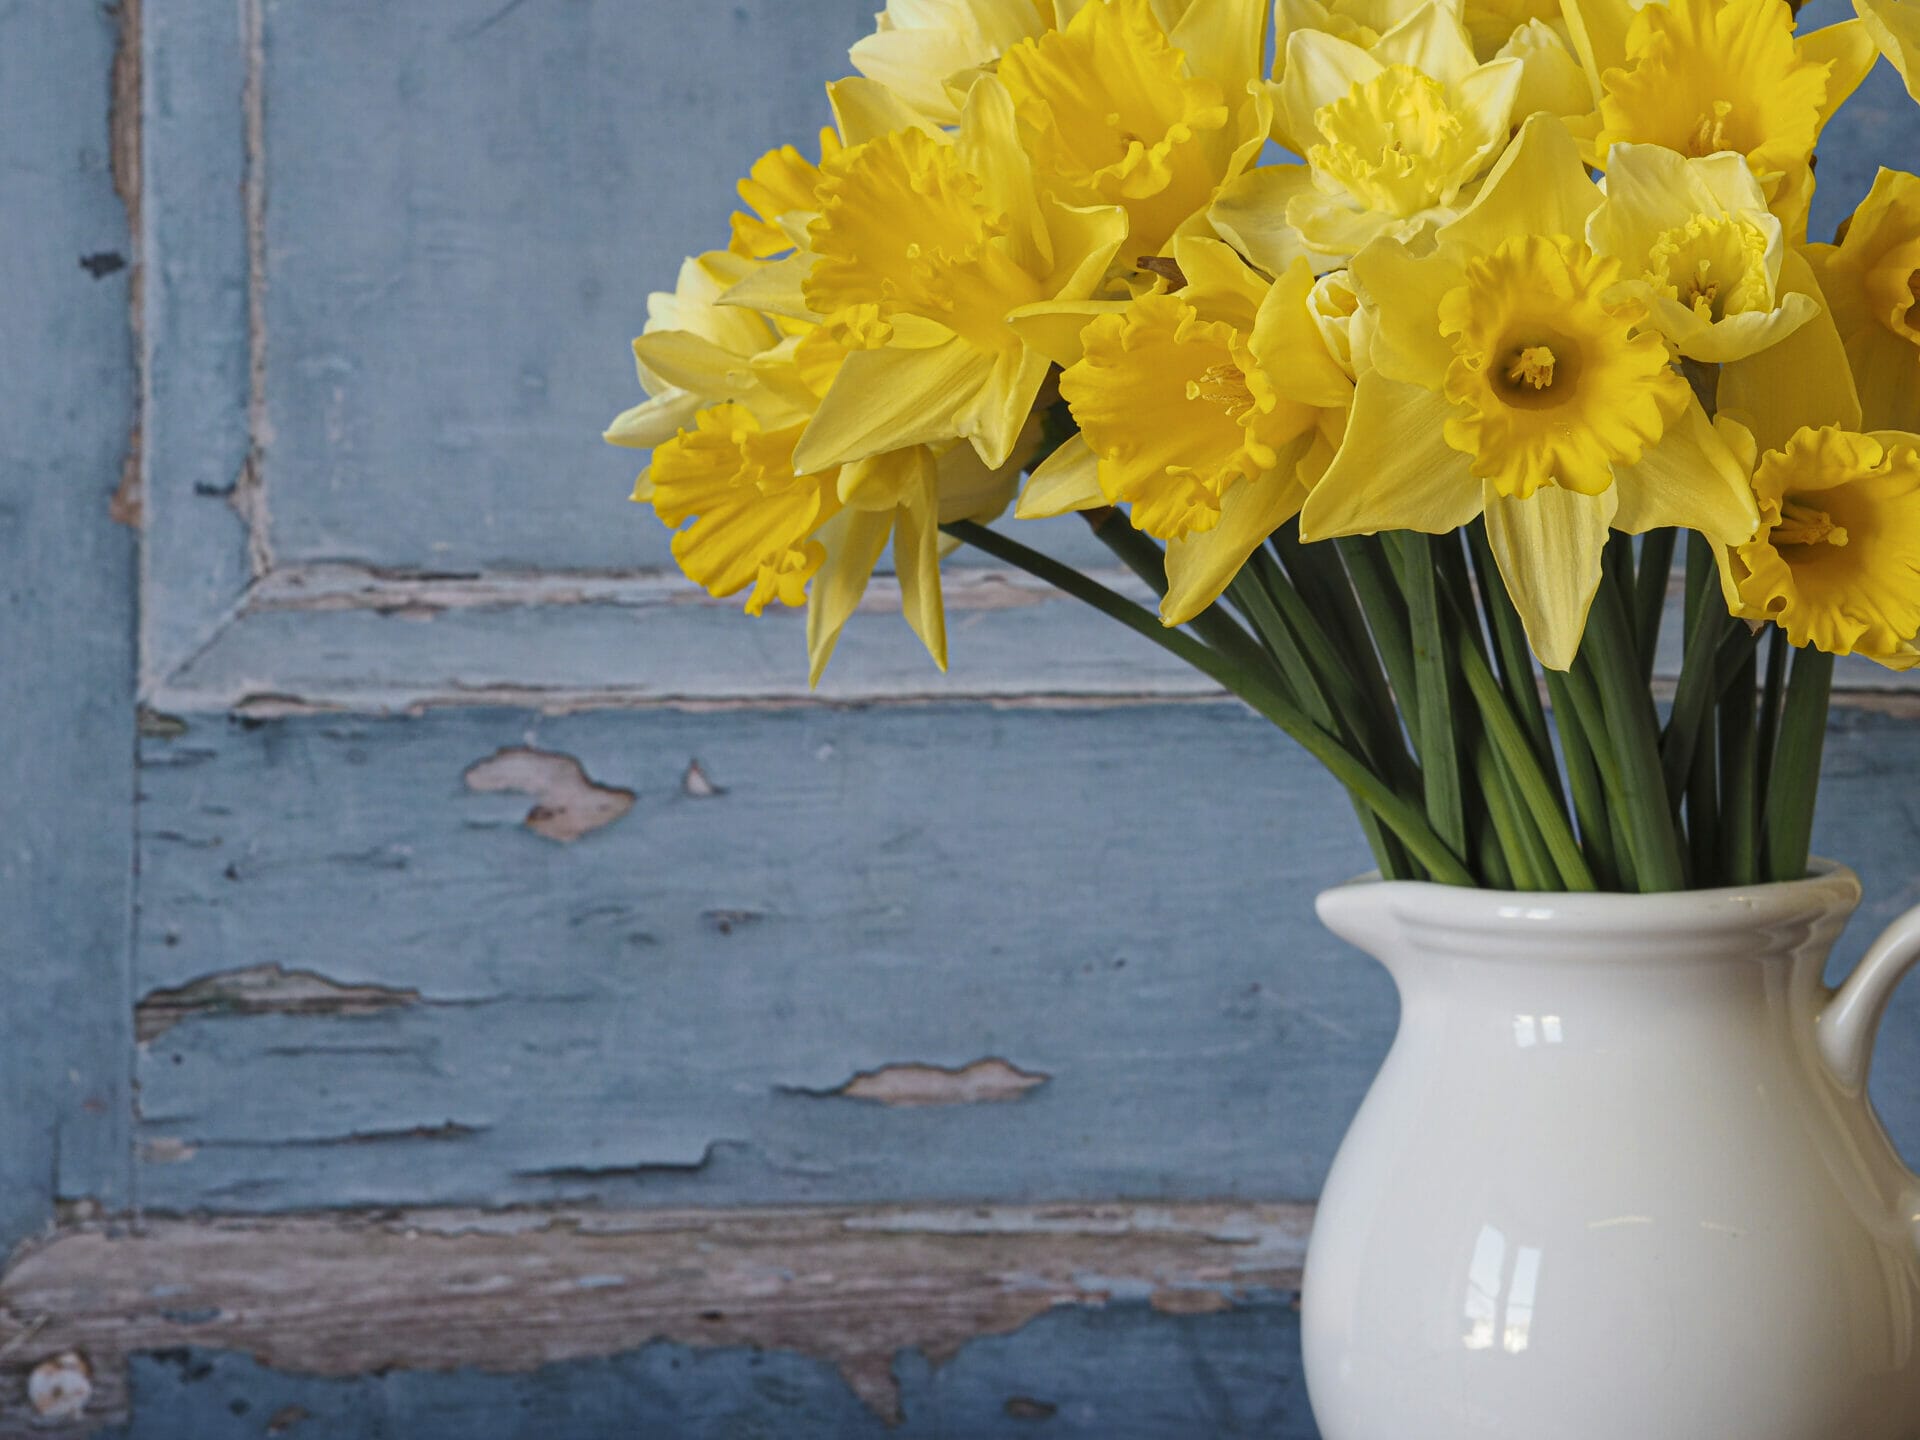 Still-Life & Floral Photography - Welshot Creative Hub - Photo of daffodils in a white jug in front of a blue background that looks like part of an old door